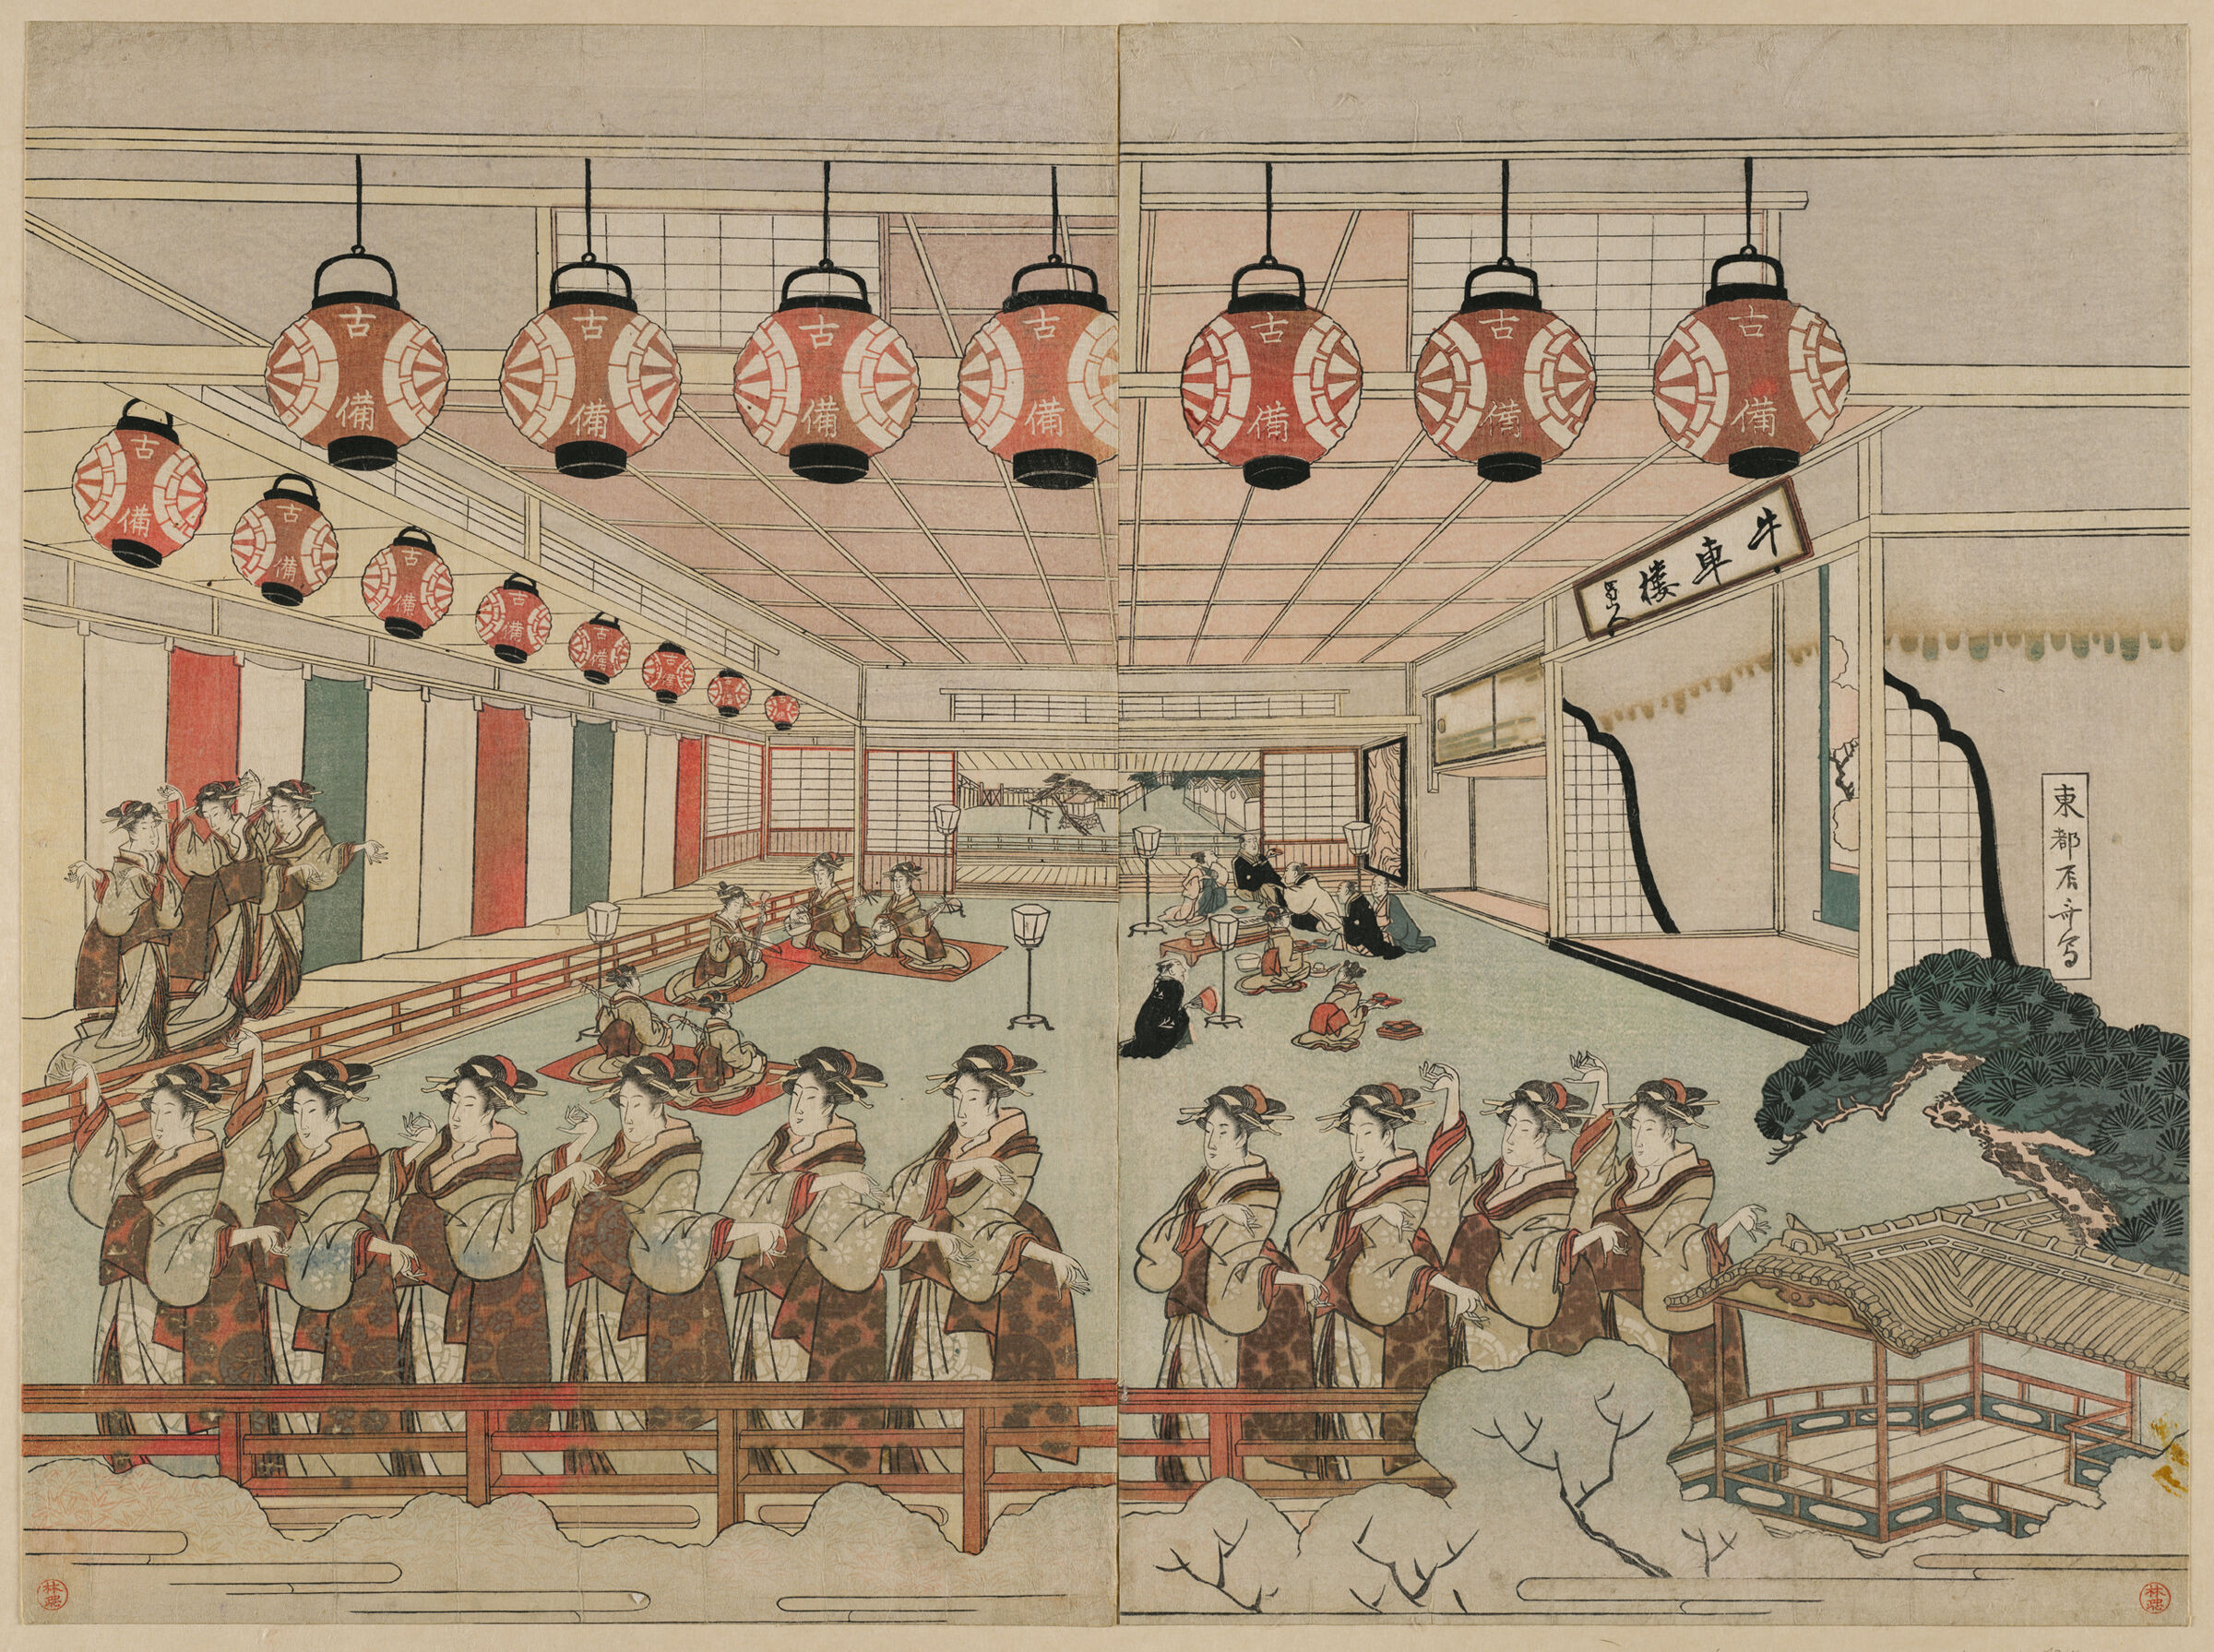 Diptych: Perspective View Of Dancers In An Interior